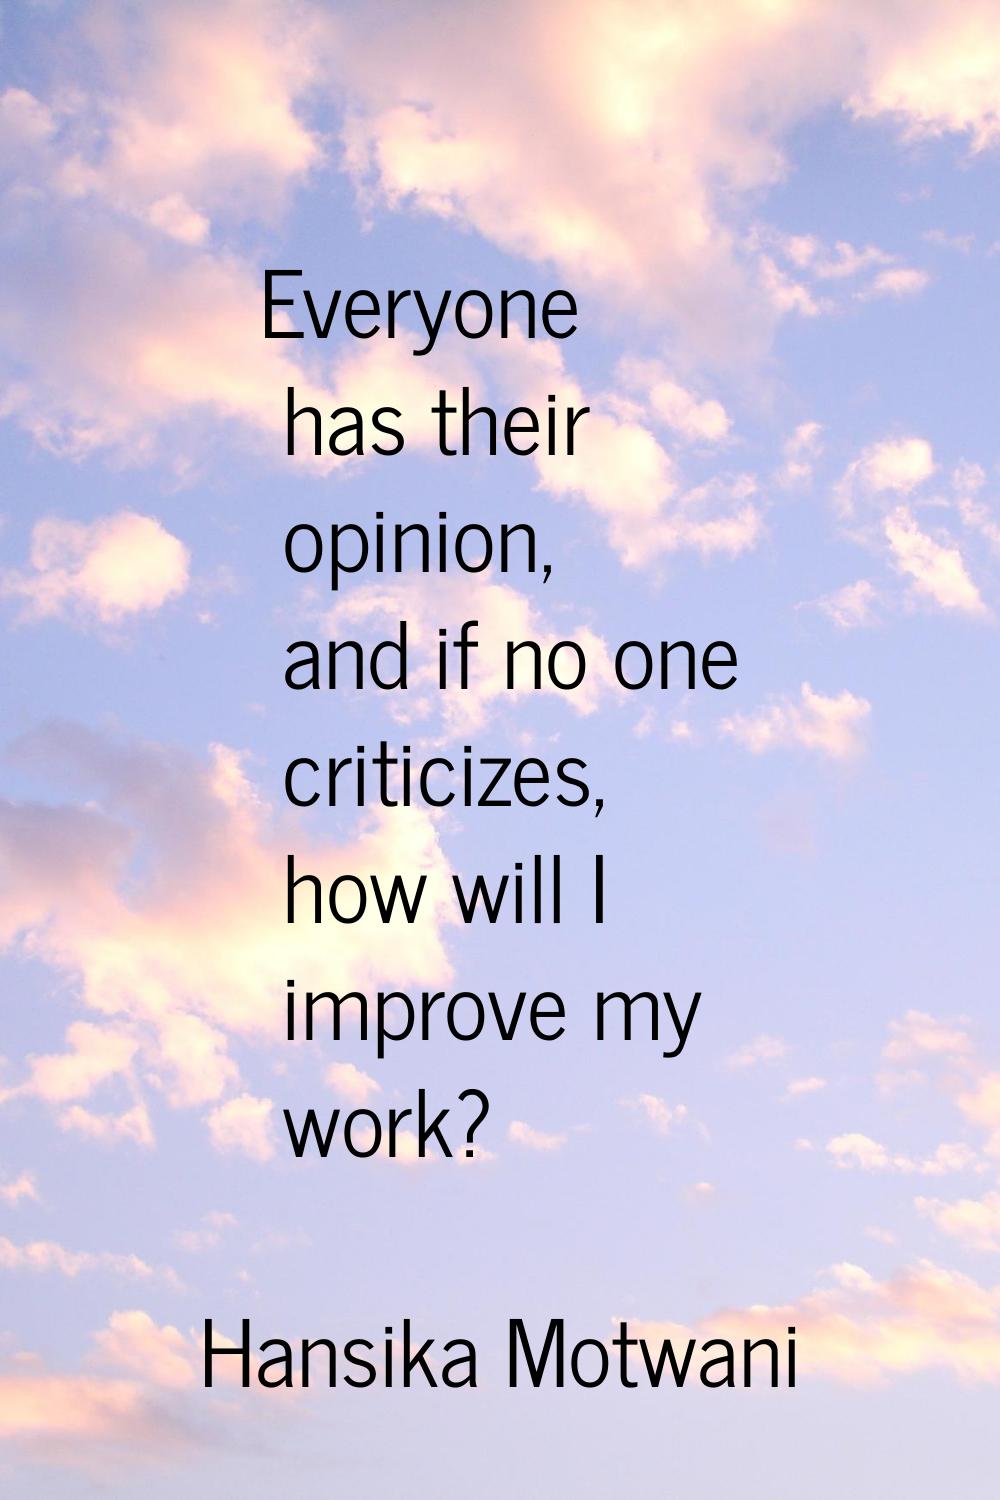 Everyone has their opinion, and if no one criticizes, how will I improve my work?